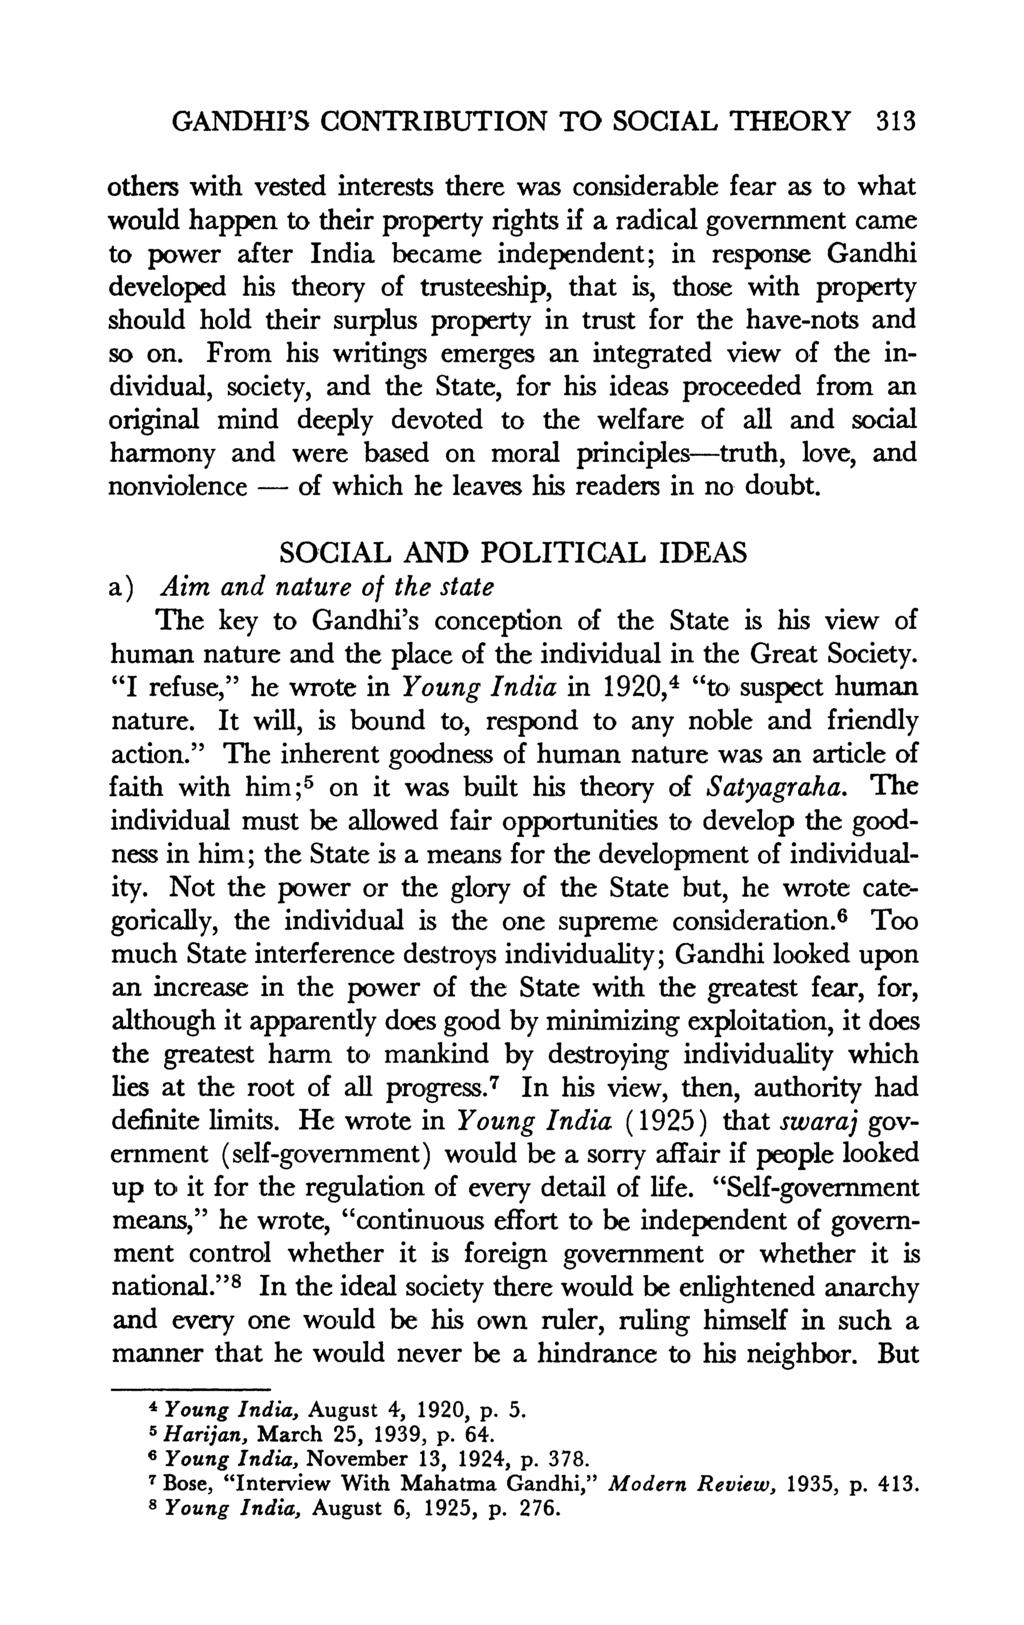 GANDHI'S CONTRIBUTION TO SOCIAL THEORY 313 others with vested interests there was considerable fear as to what would happen to their property rights if a radical government came to power after India